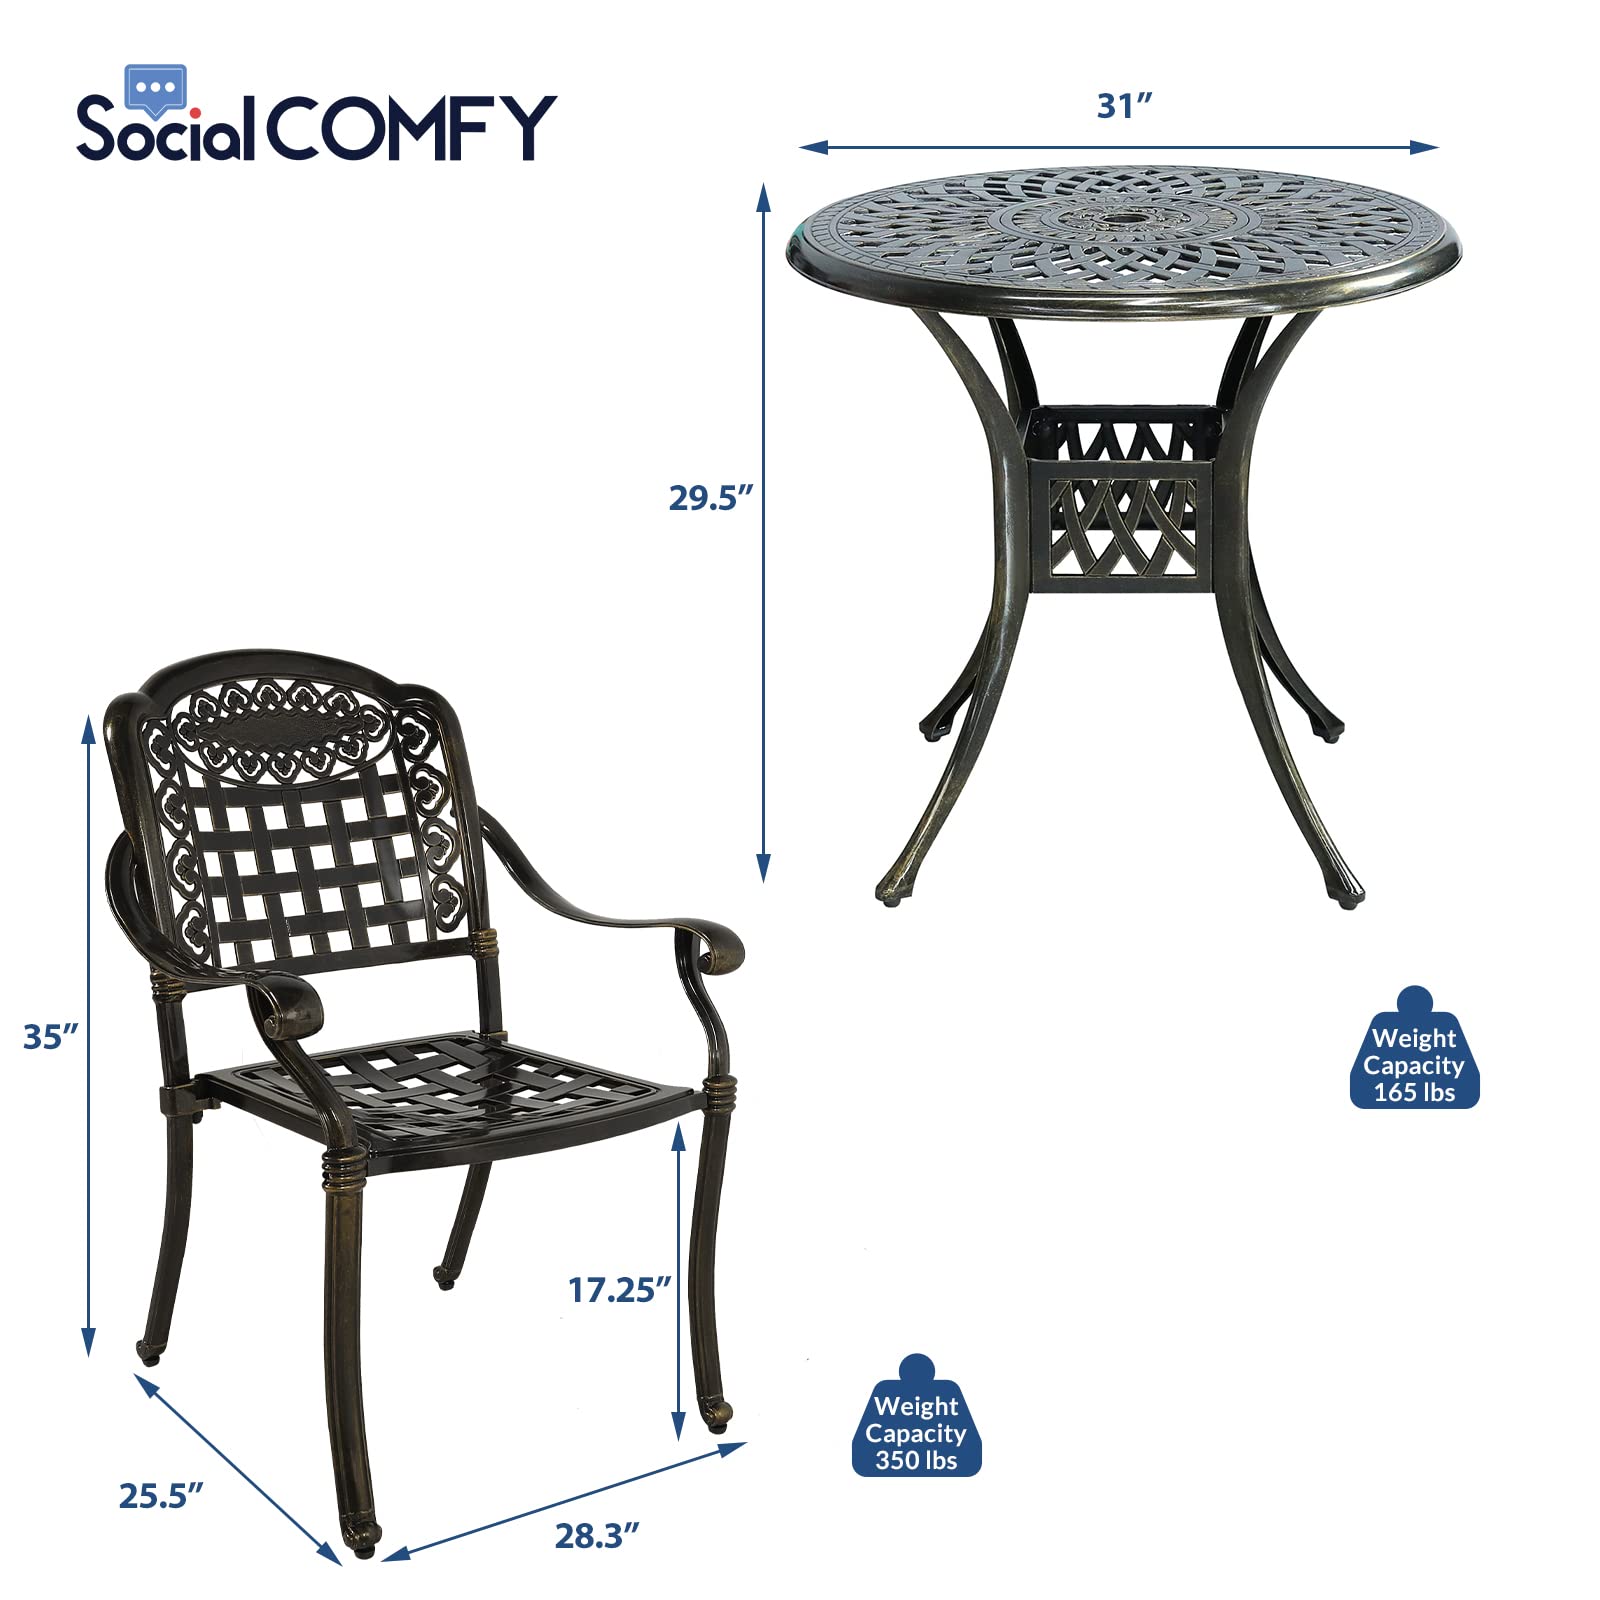 SOCIALCOMFY 3-Piece Outdoor Patio Dining Set, All-Weather Cast Aluminum Furniture Conversation Set, Include 2 Chairs and a 31 inch Round Table with Umbrella Hole for Balcony Lawn Garden Backyard - image 5 of 7